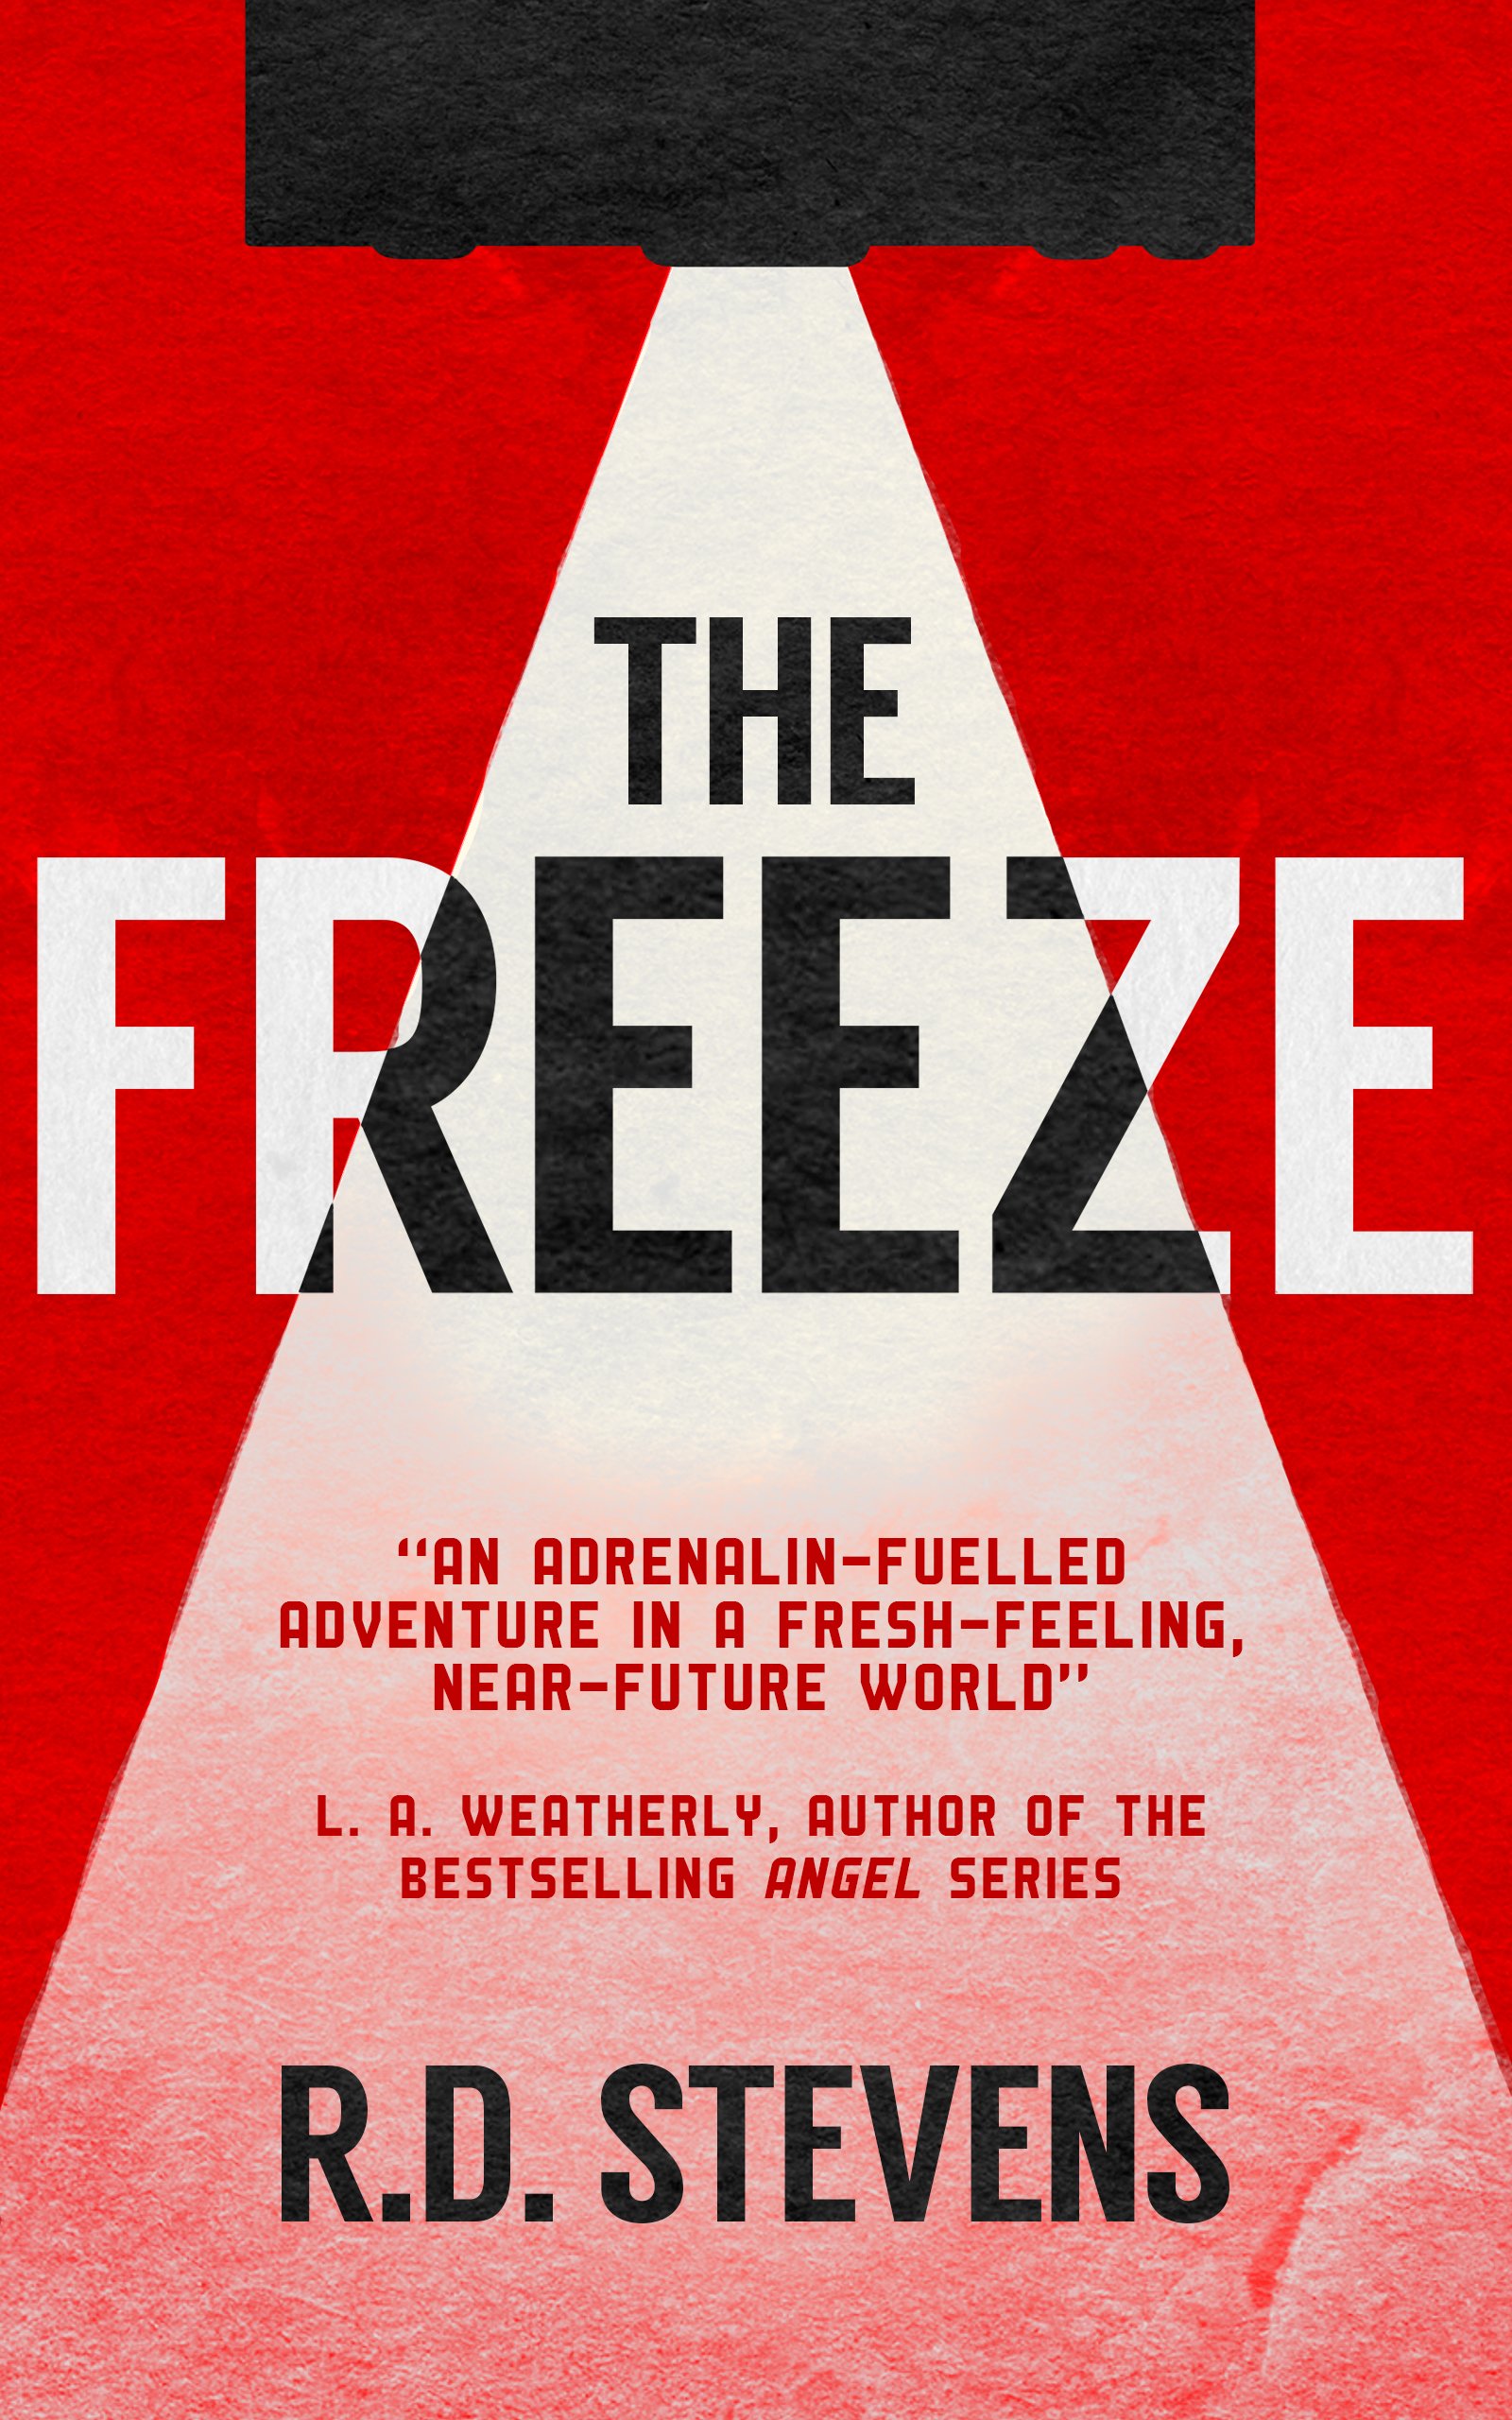 The Freeze - ebook cover.jpg